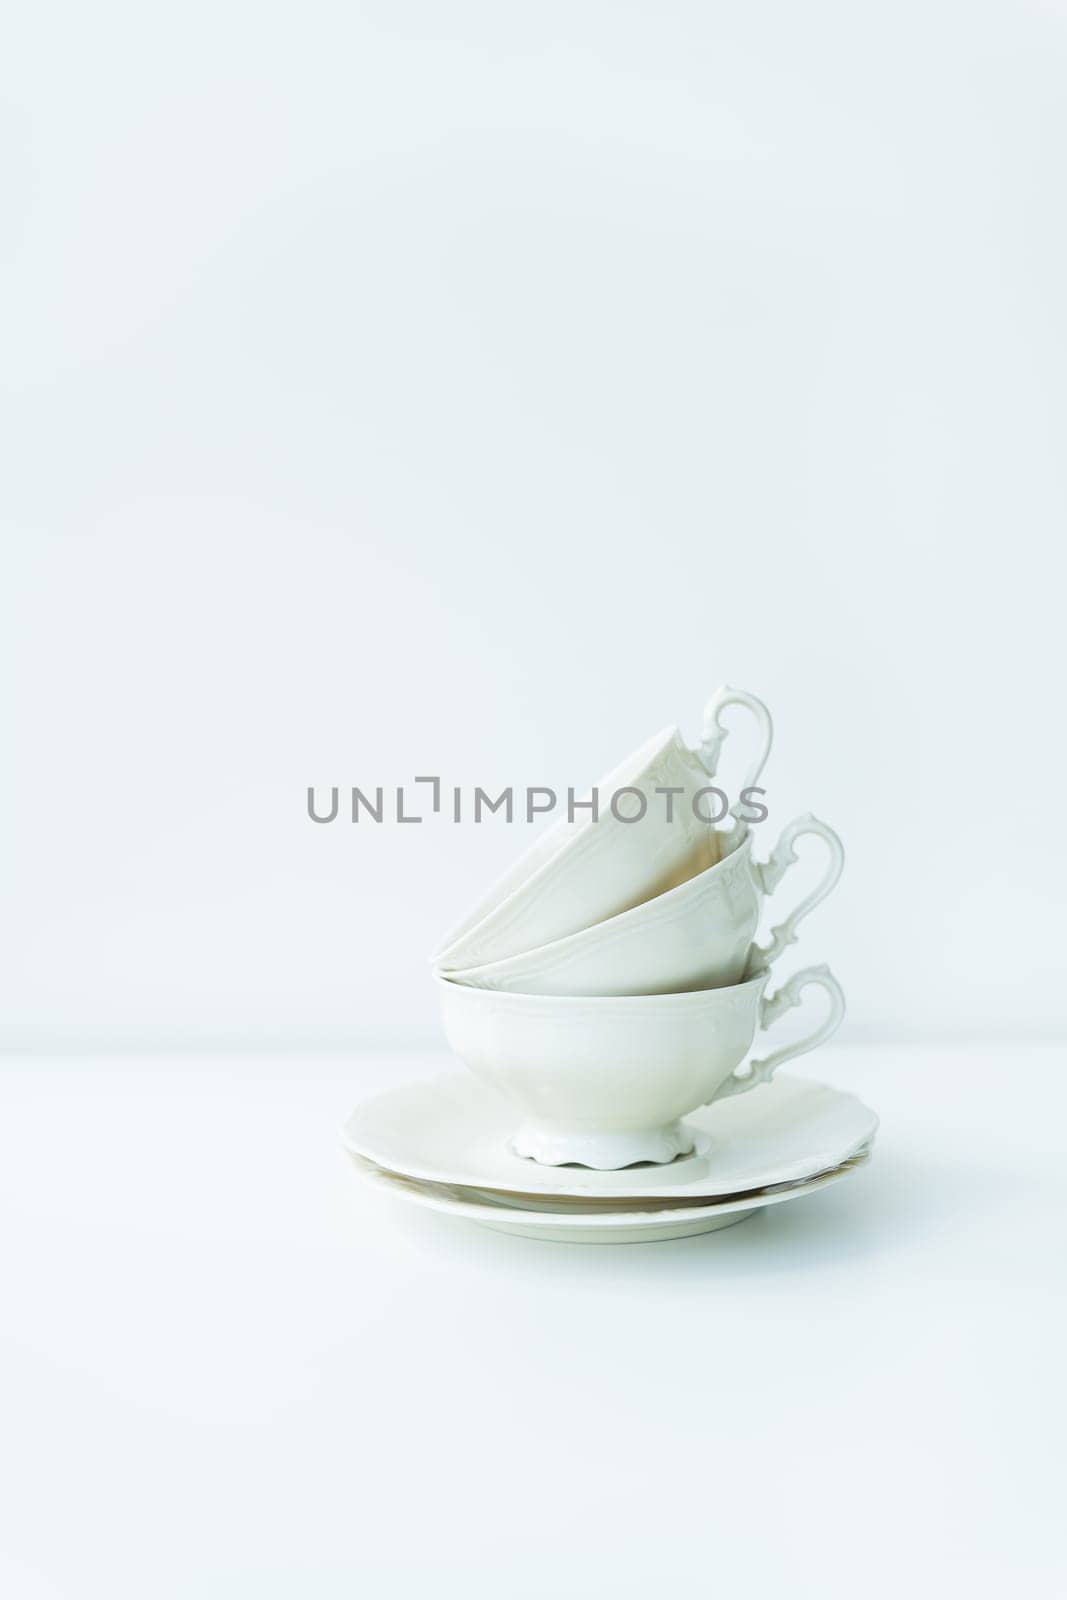 A set of cream porcelain cups with saucers on the table, preparation for the tea ceremony, top view